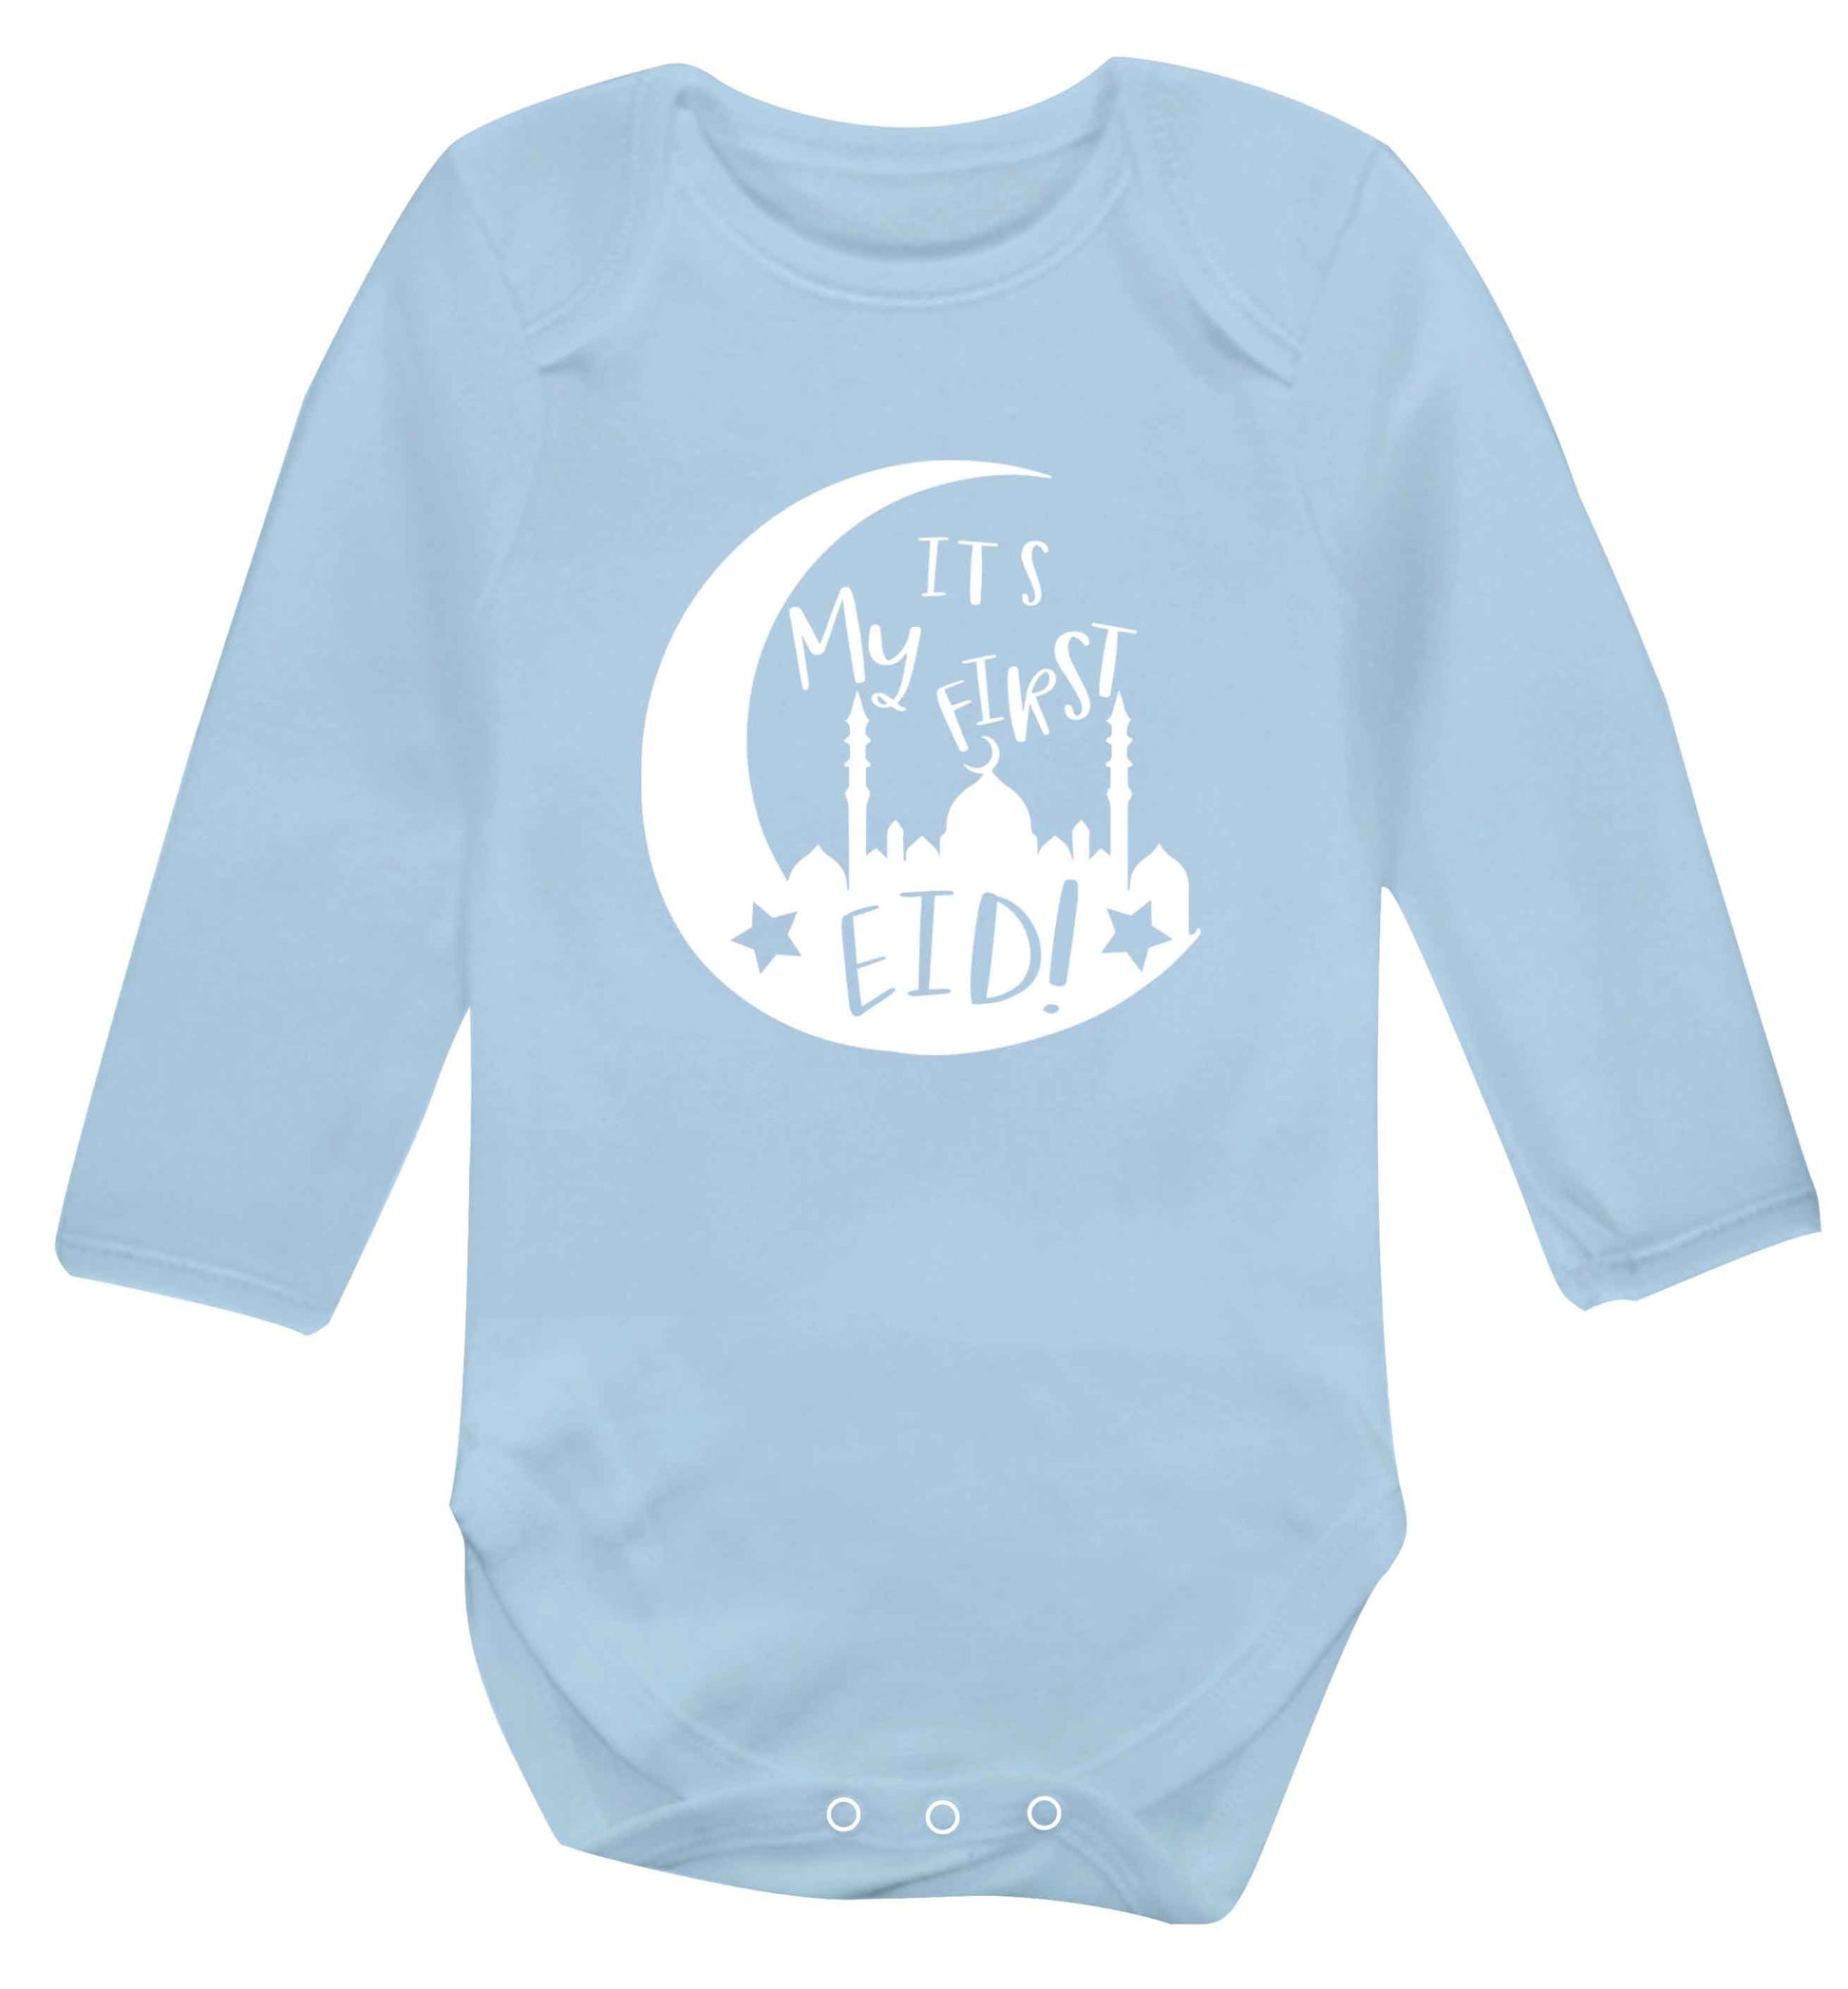 It's my first Eid moon baby vest long sleeved pale blue 6-12 months